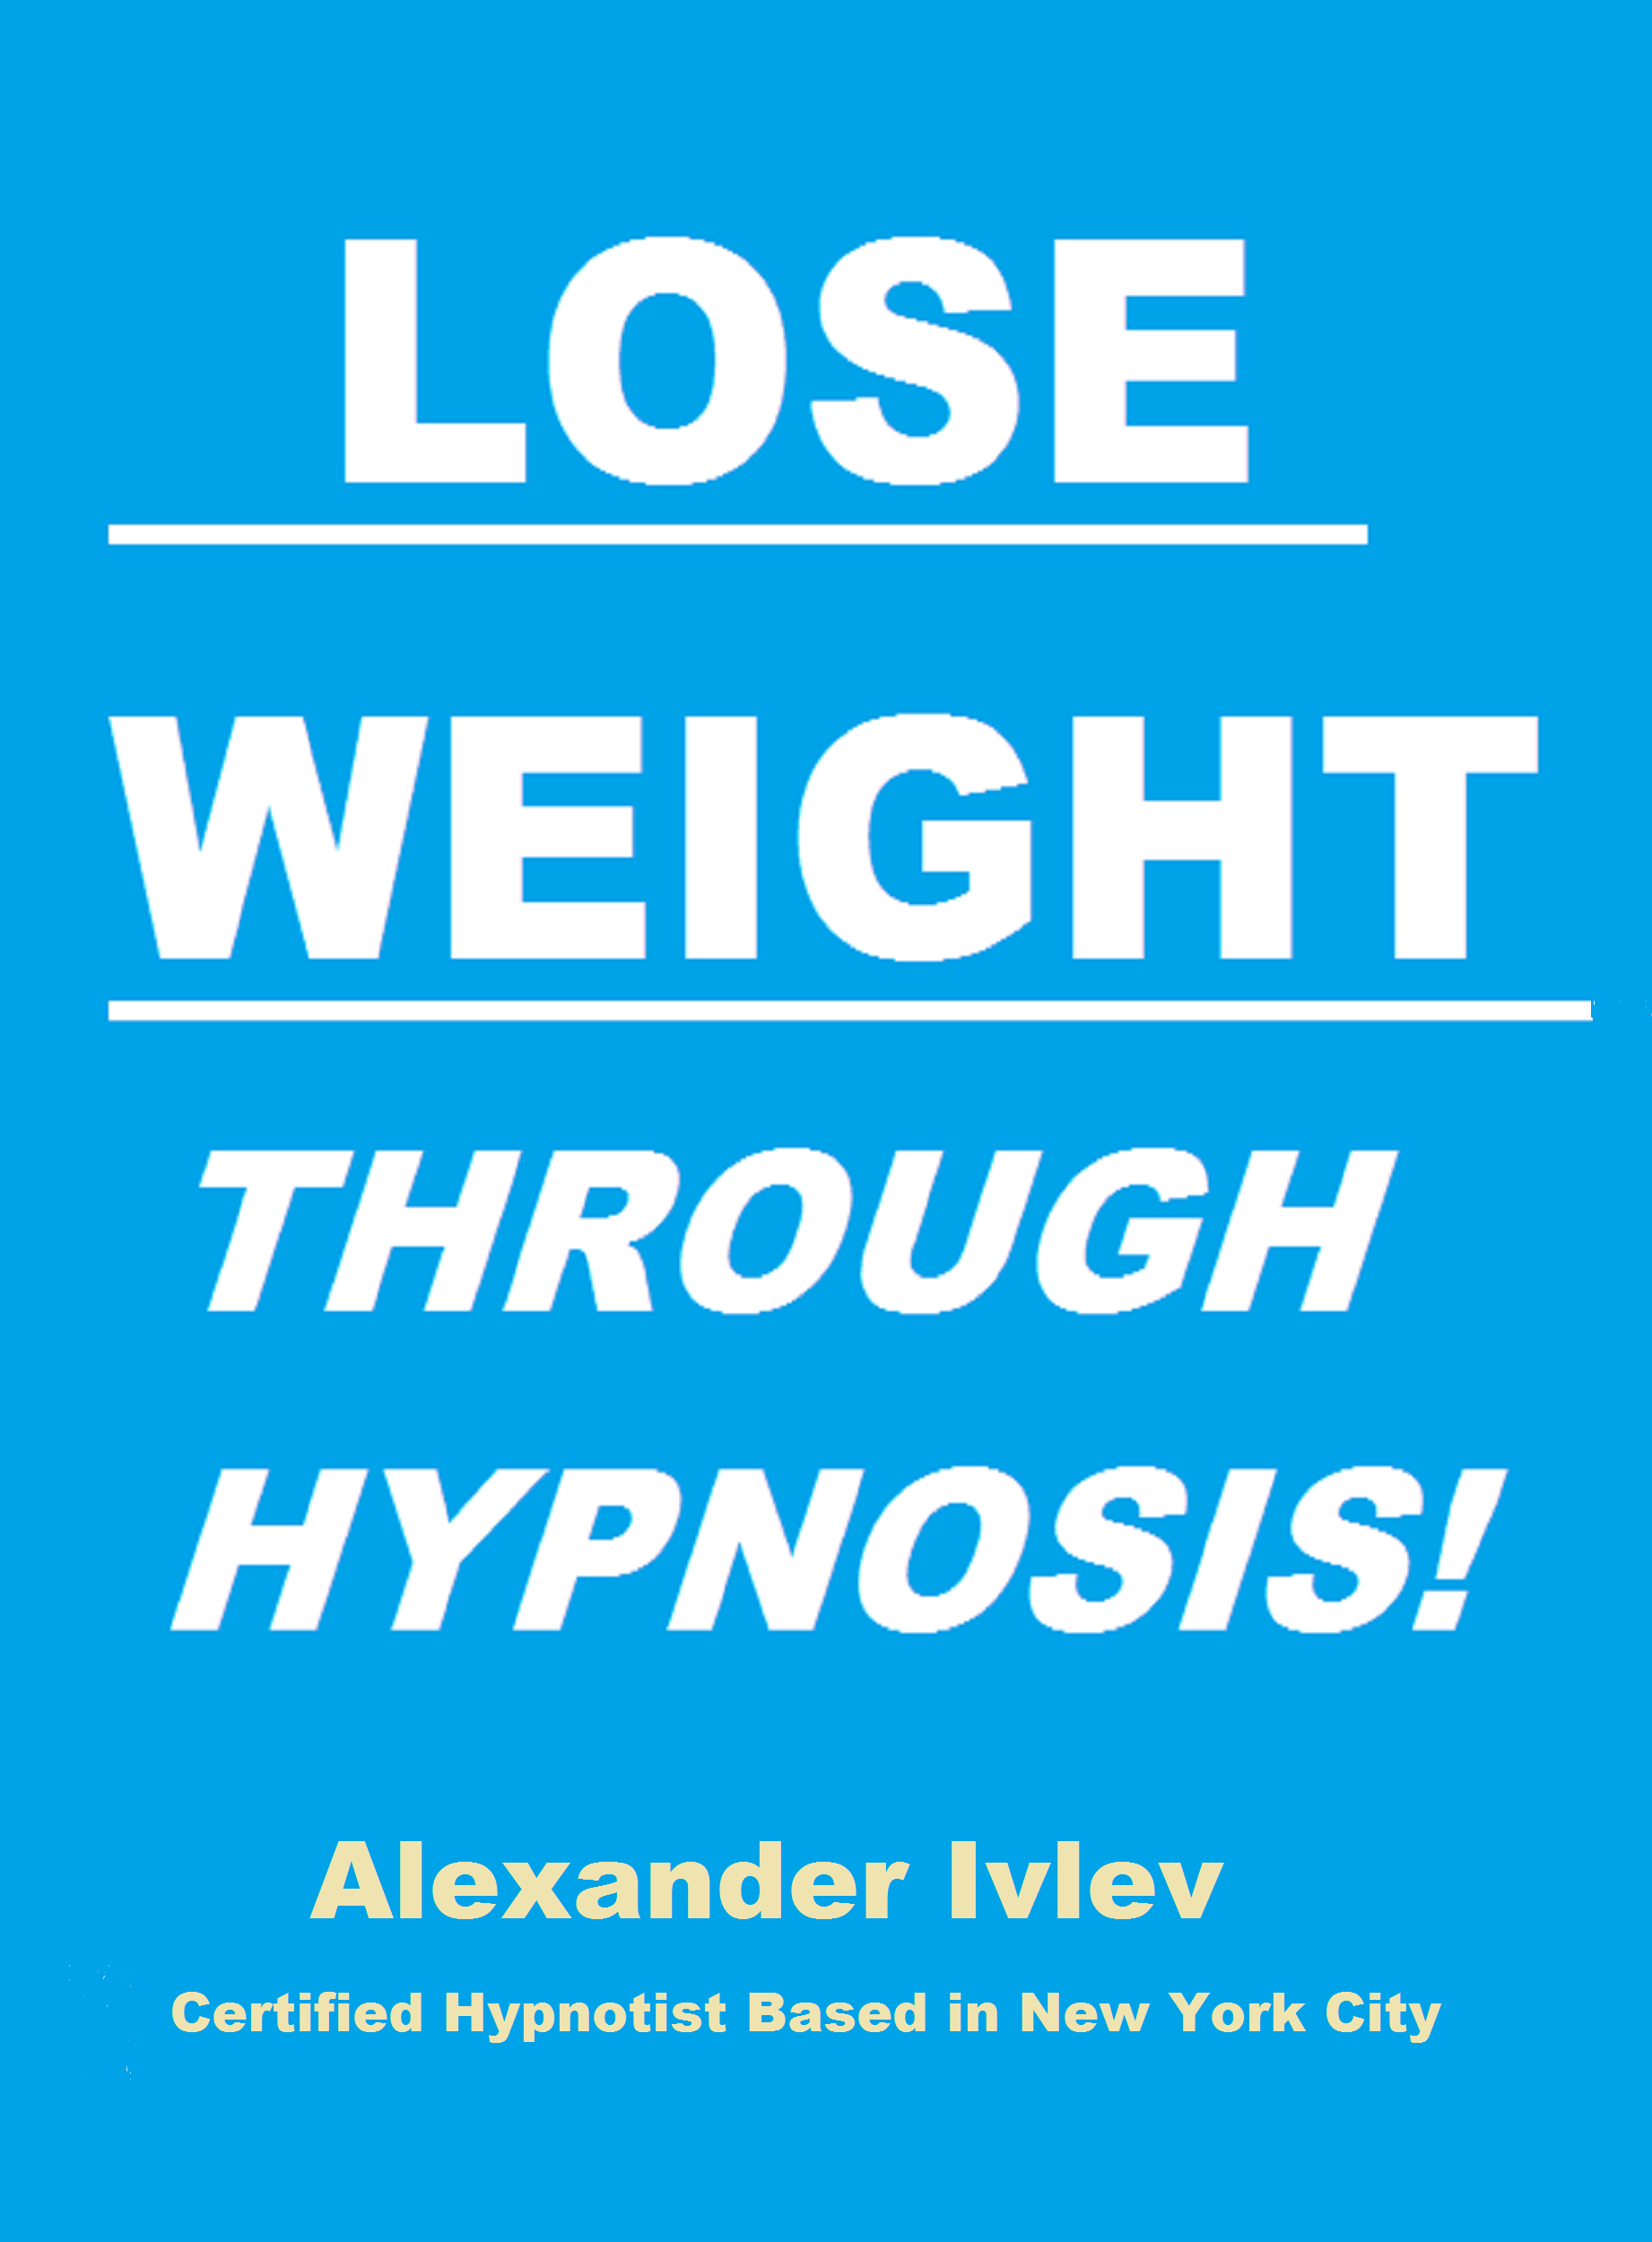 hypnosis to lose weight fast